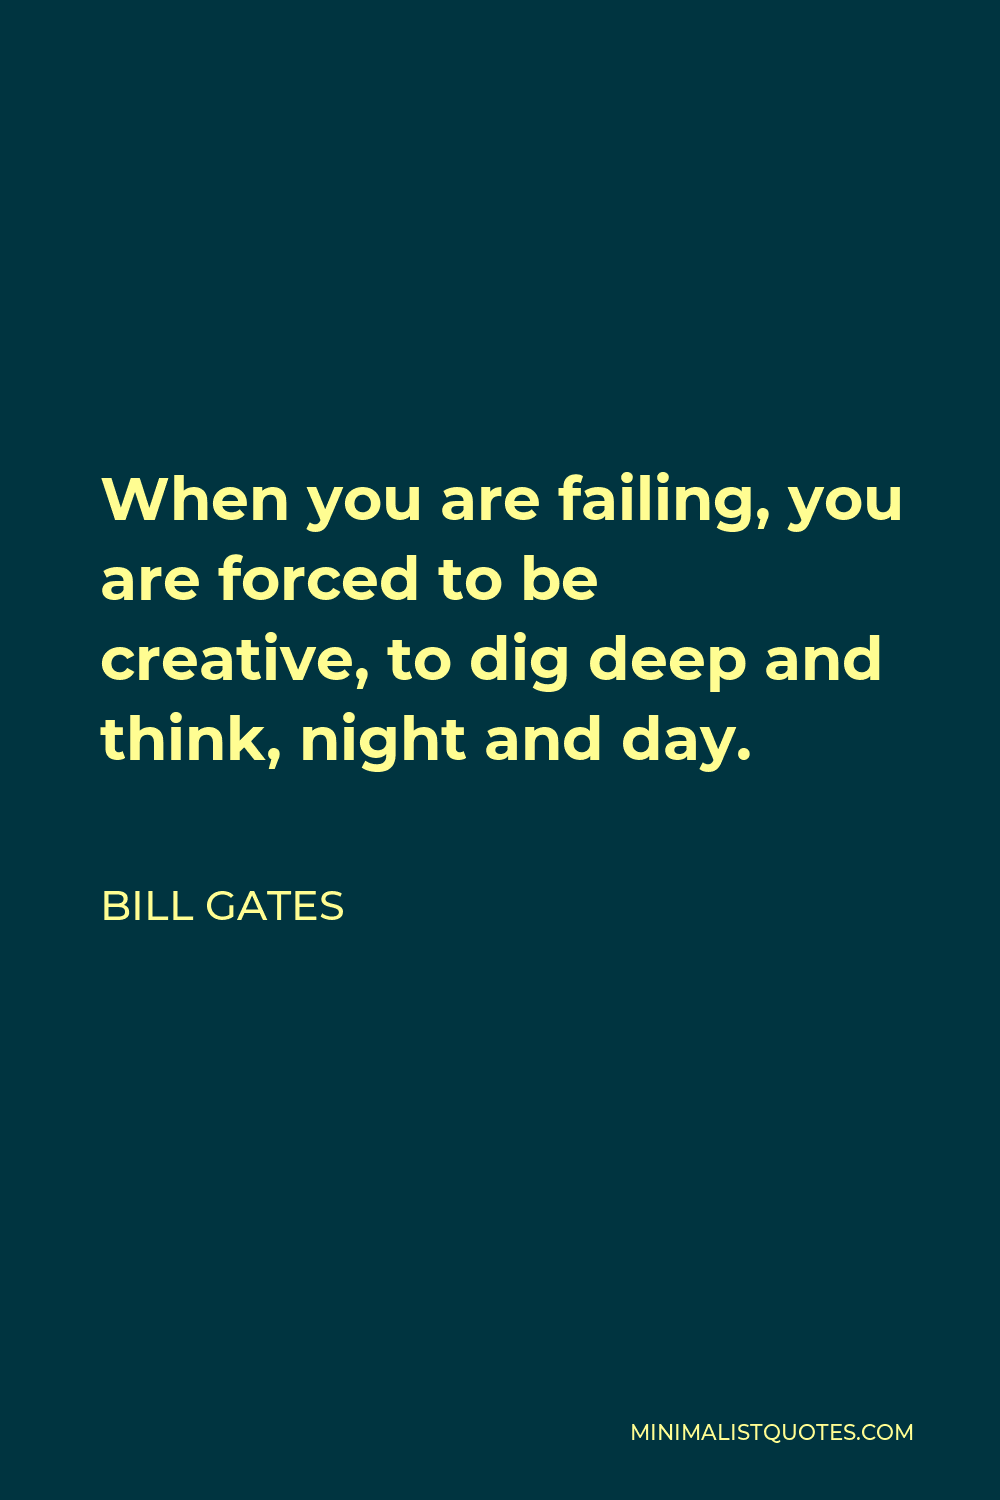 Bill Gates Quote - When you are failing, you are forced to be creative, to dig deep and think, night and day.